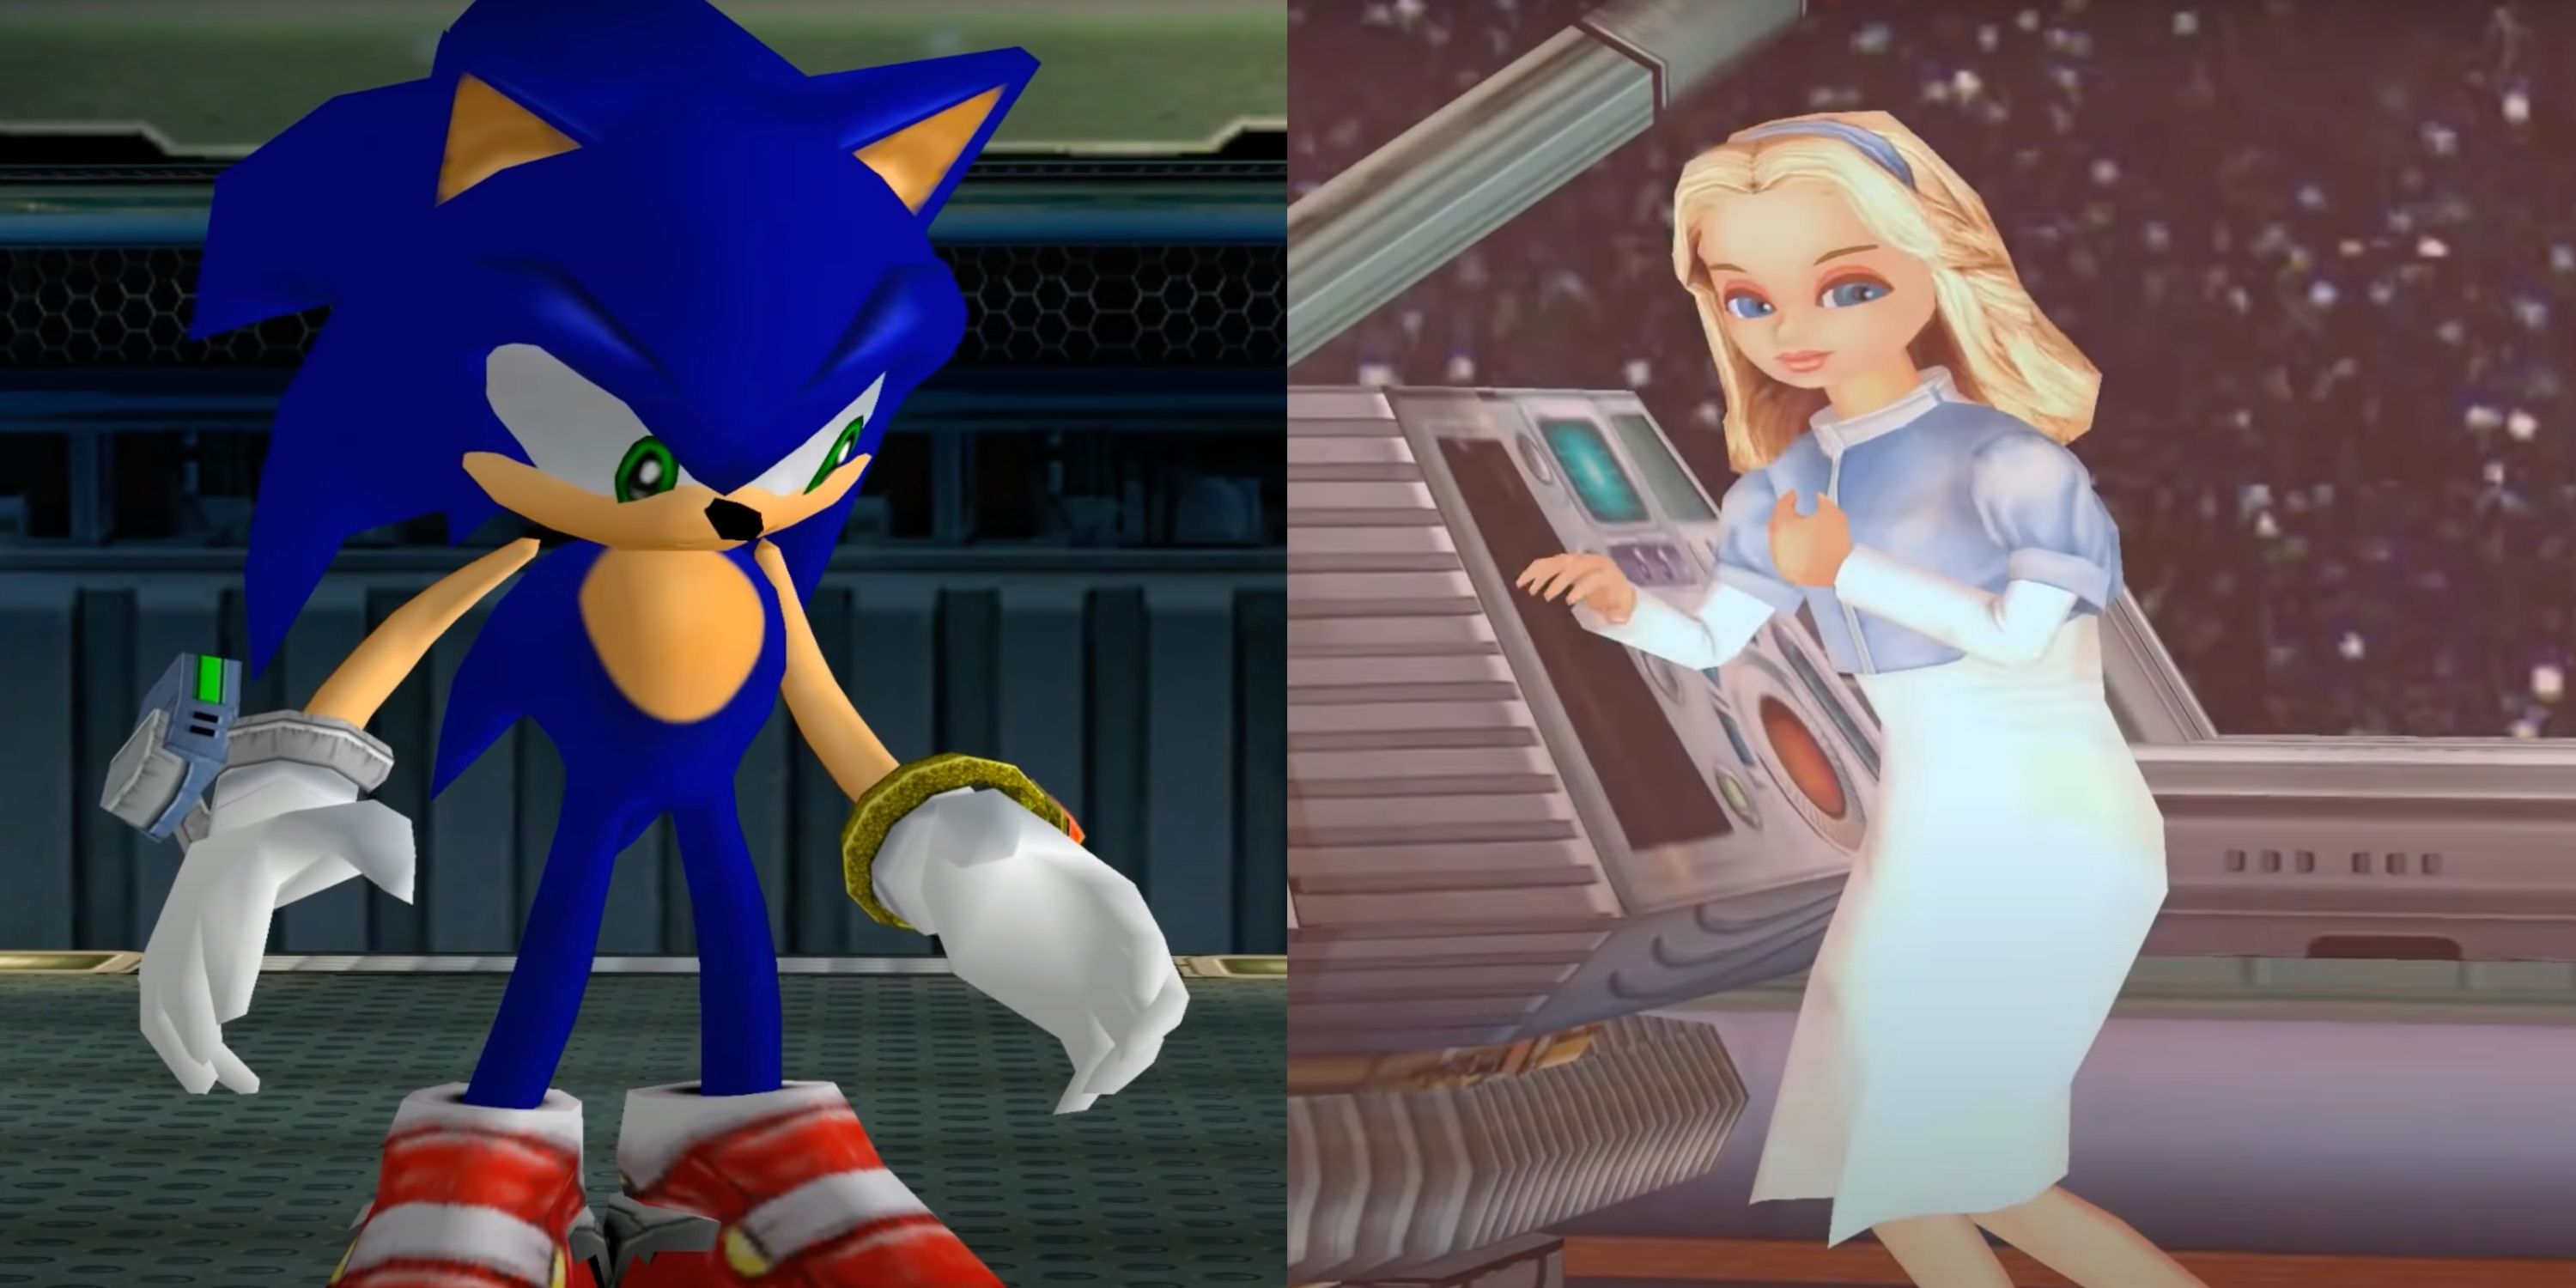 split image of sonic with his head down looking sad, and Maria robotnik with a gentle smile on her face